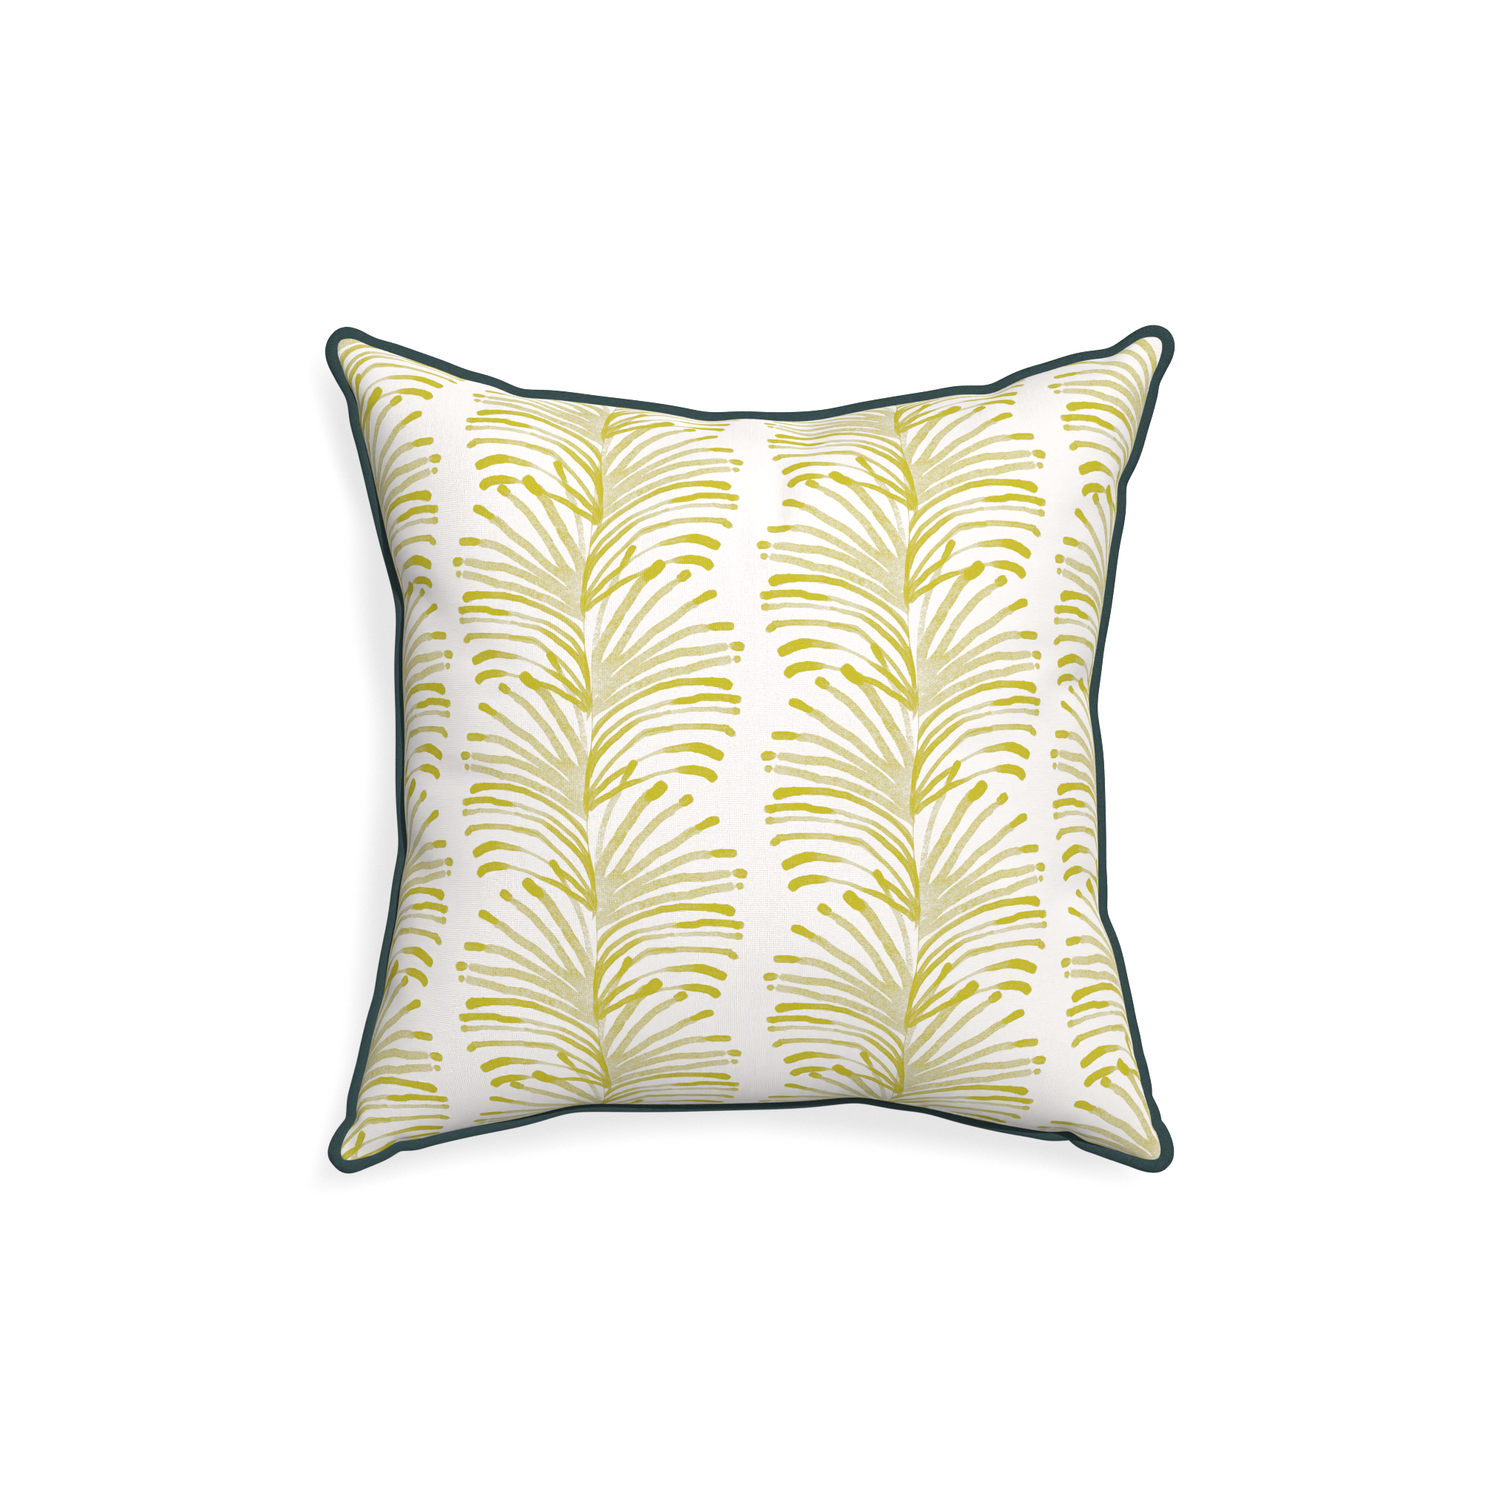 18-square emma chartreuse custom yellow stripe chartreusepillow with p piping on white background